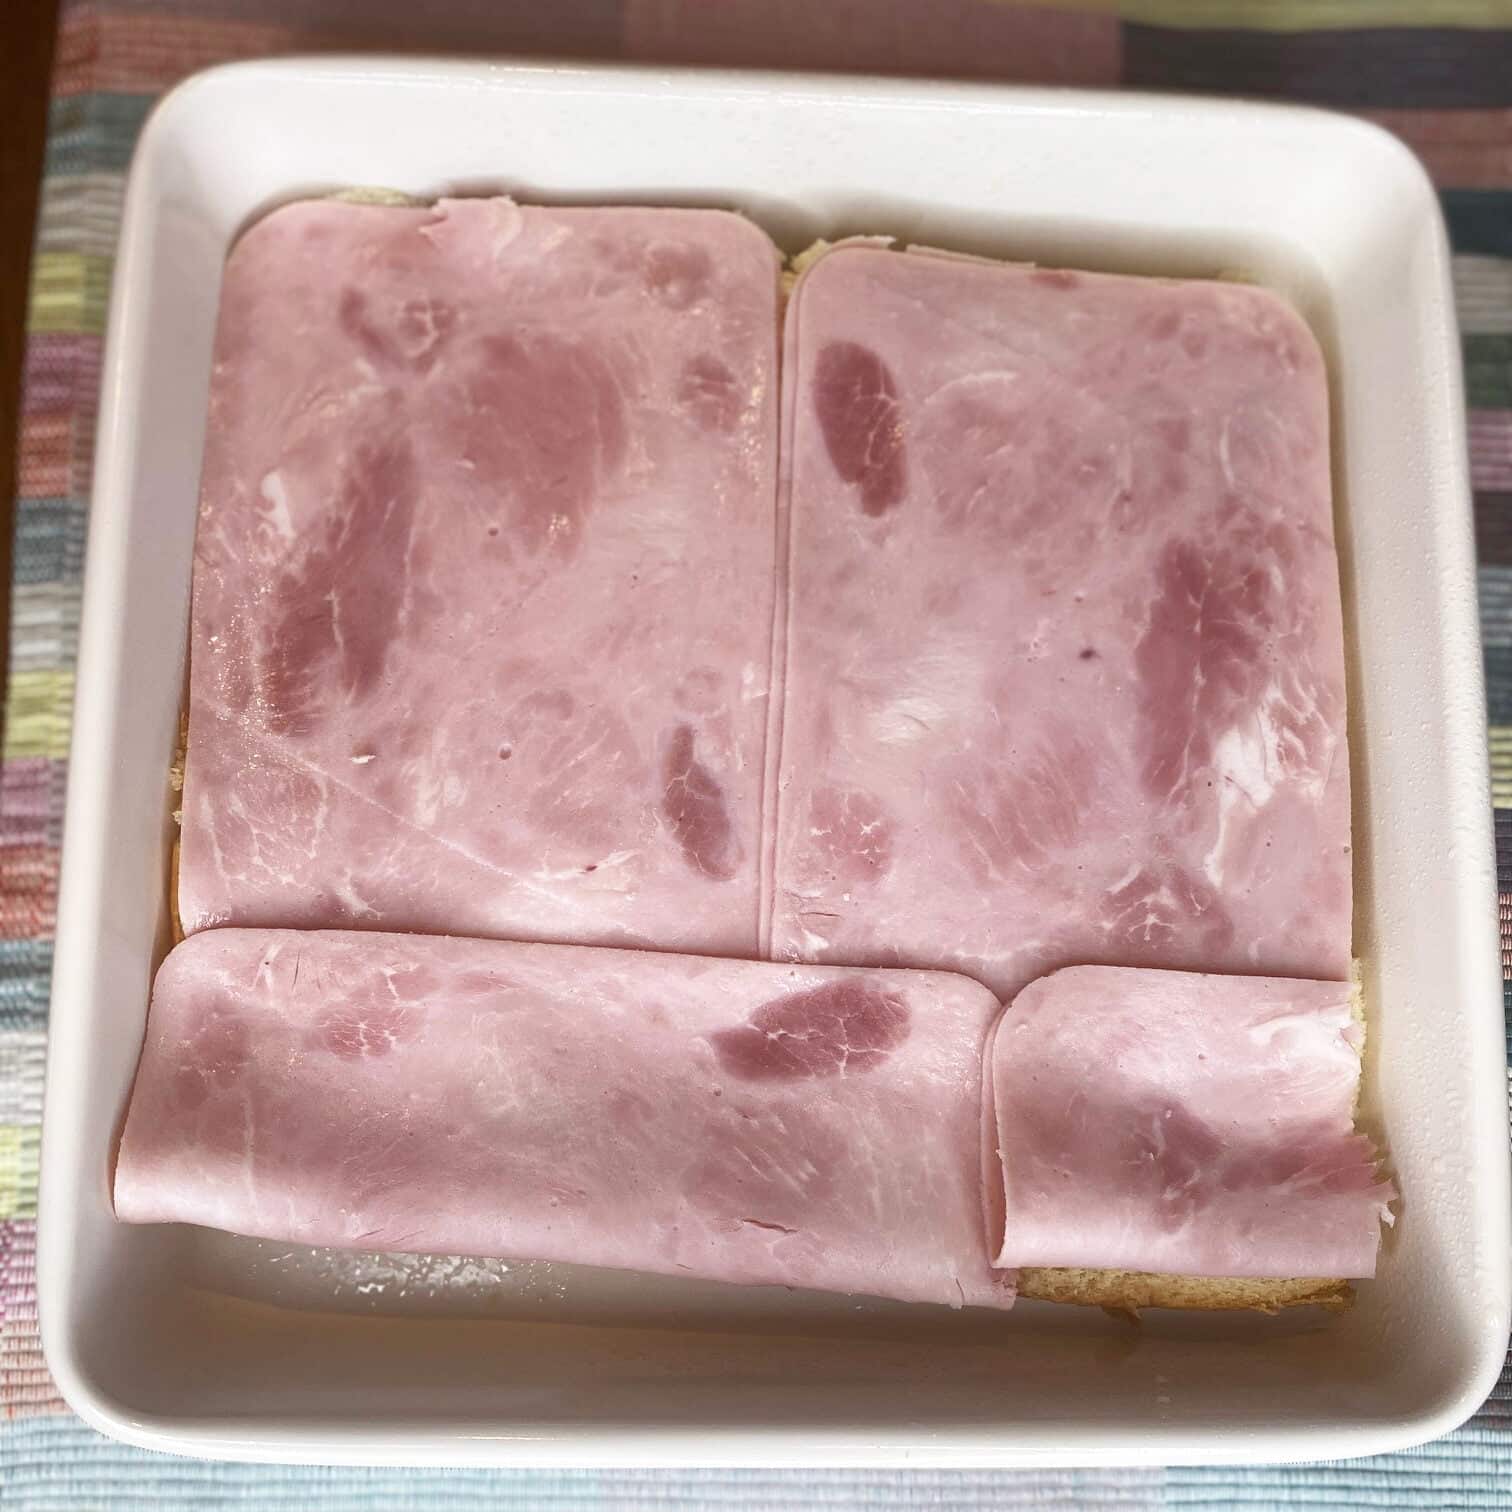 Layer of cooked ham